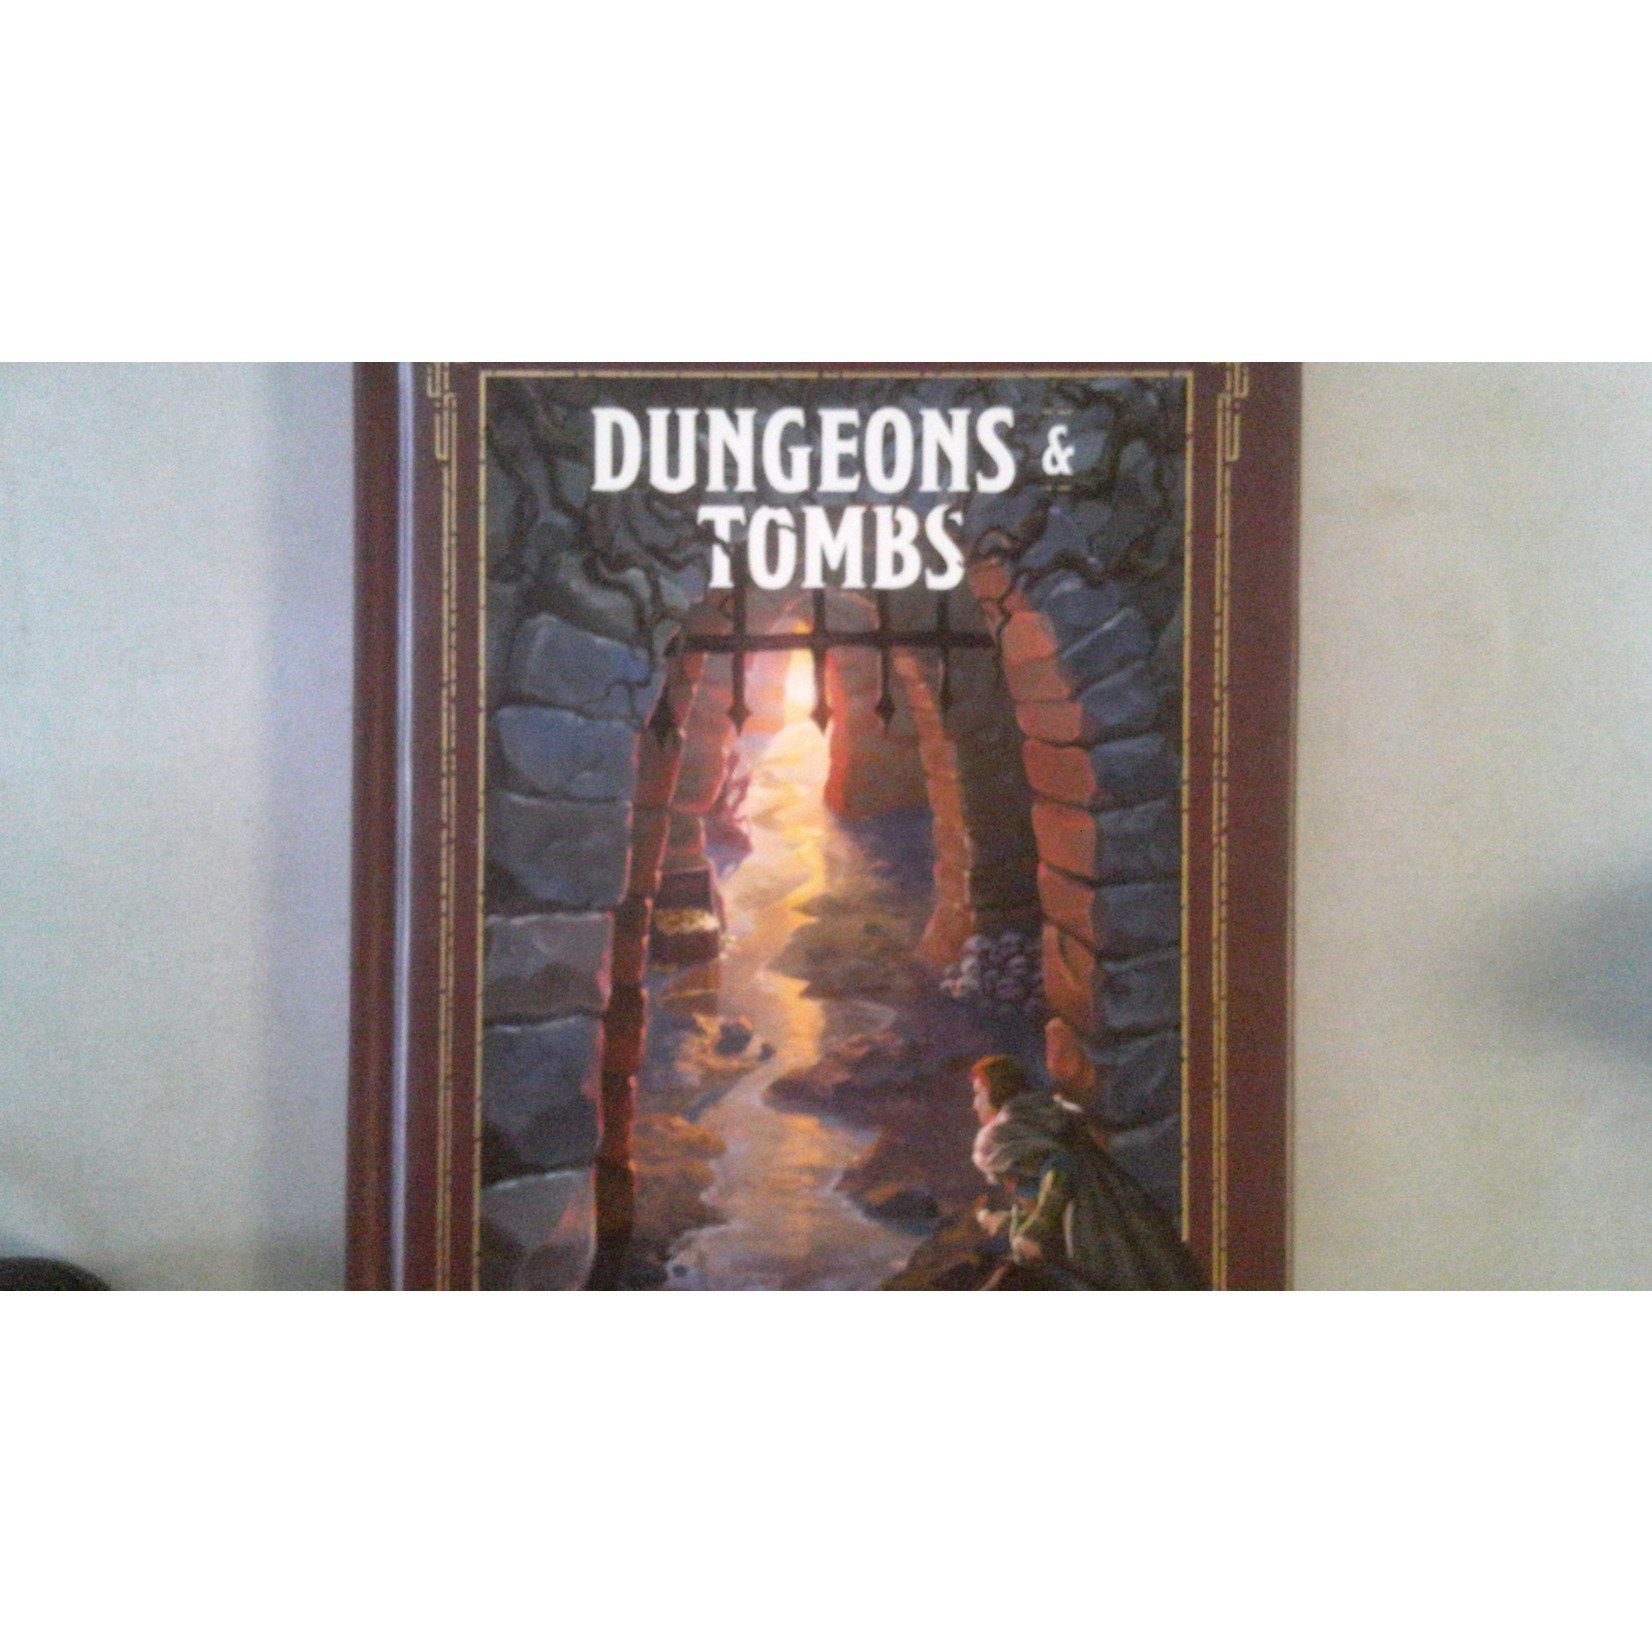 Dungeons & Dragons: Dungeons & Tombs